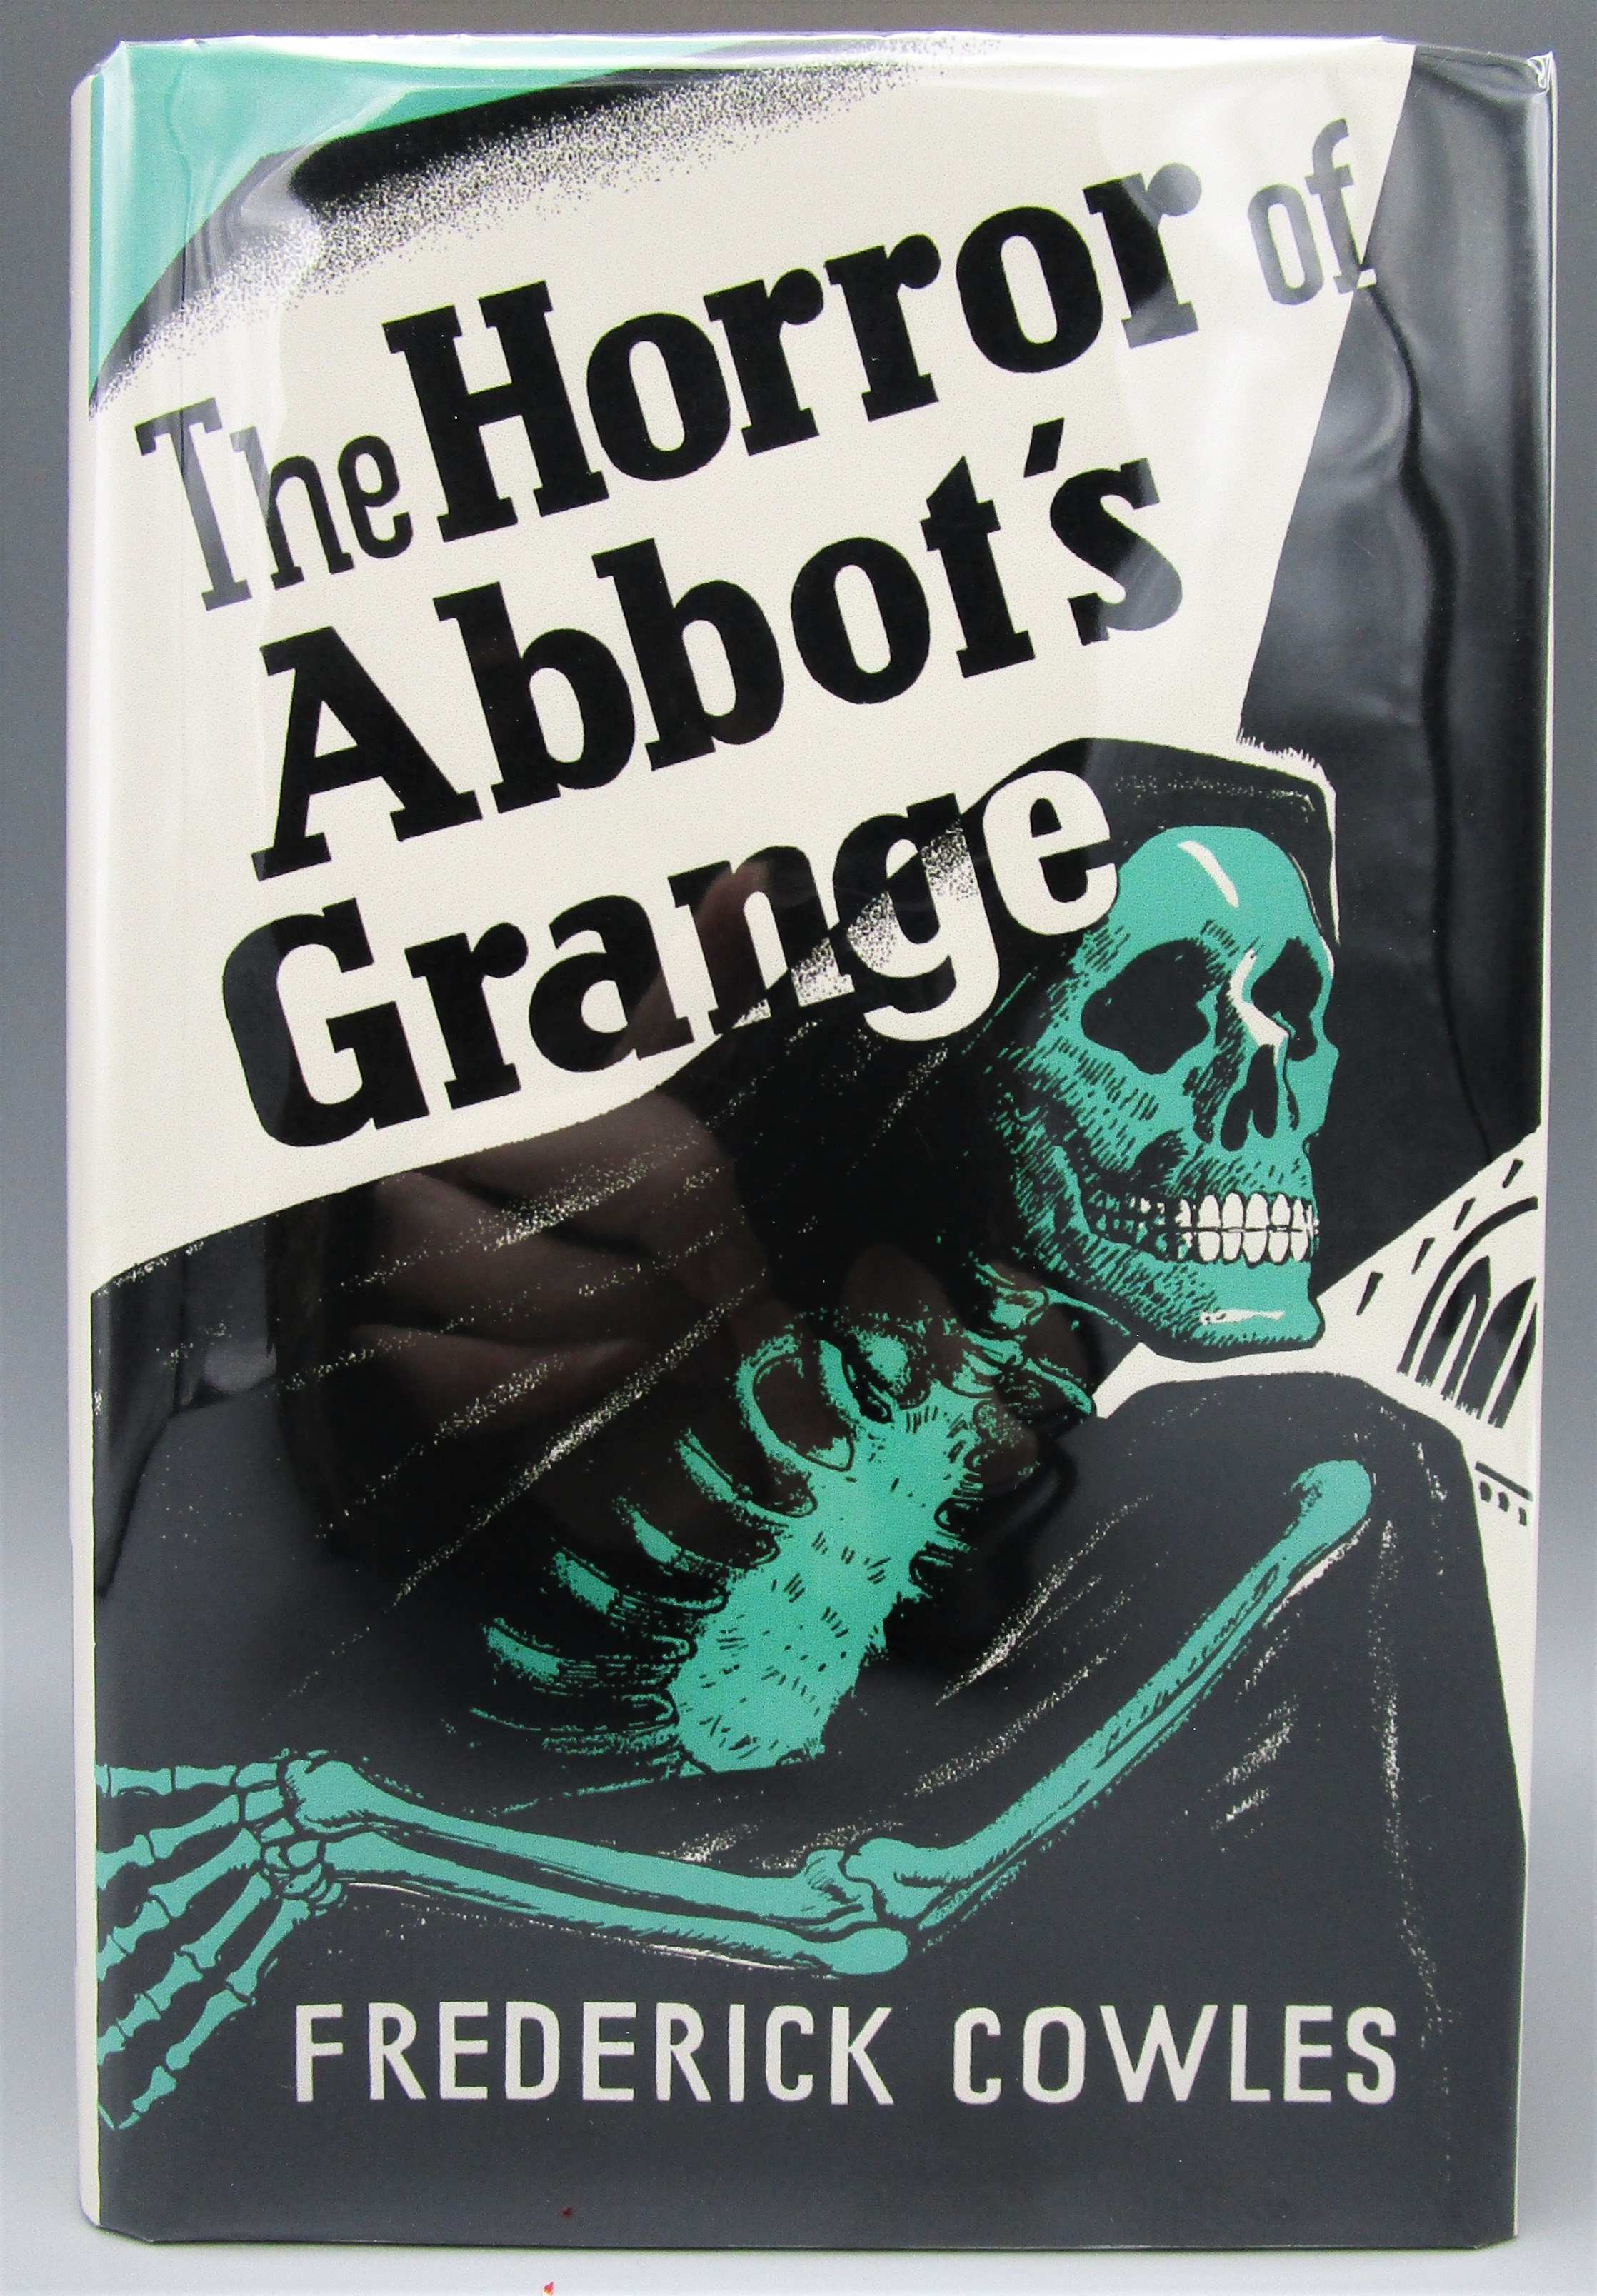 [1st　ABBOT'S　Frederick　1936　HORROR　by　Cowles　Books　OF　Panoply　GRANGE　Edition]